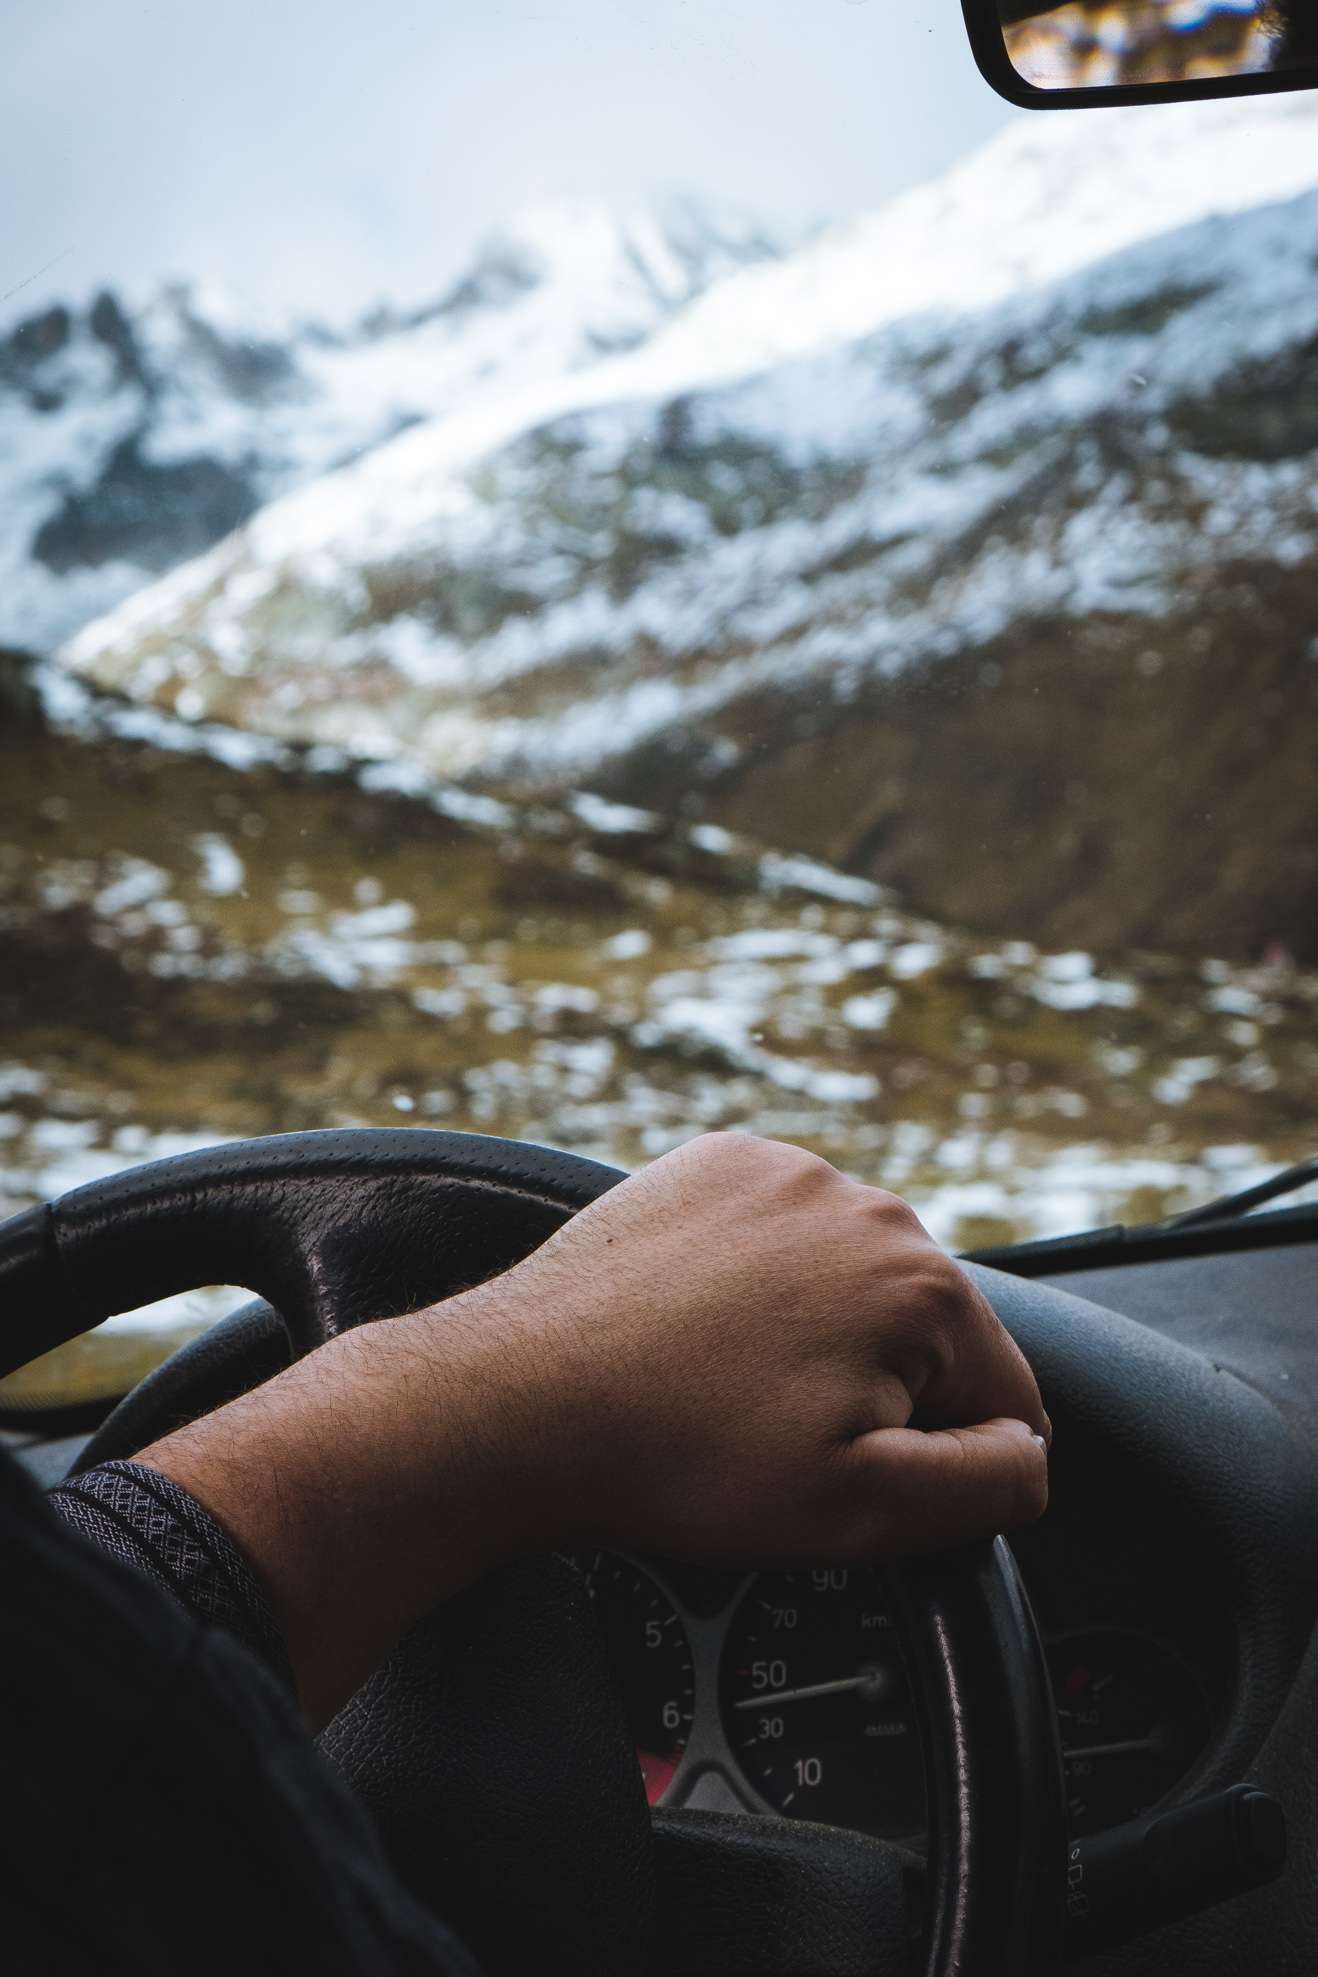 Thomas's hand on the steering wheel as he drives us through the snowy, mountainous landscape of Switzerland in the back